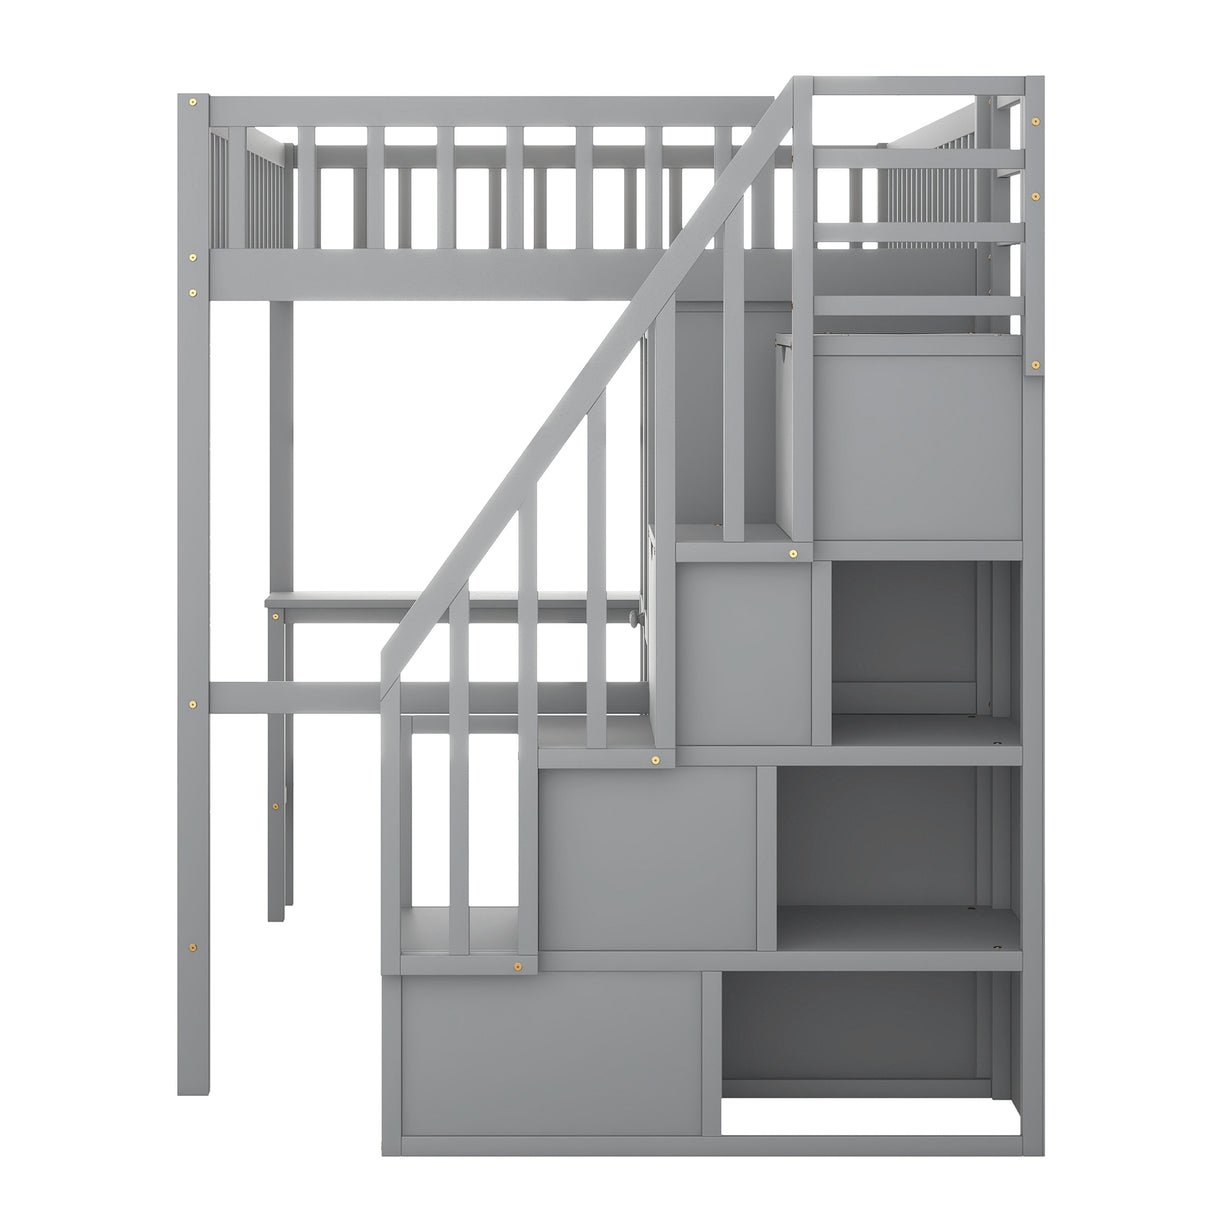 Full size Loft Bed with Bookshelf,Drawers,Desk,and Wardrobe-Gray - Home Elegance USA